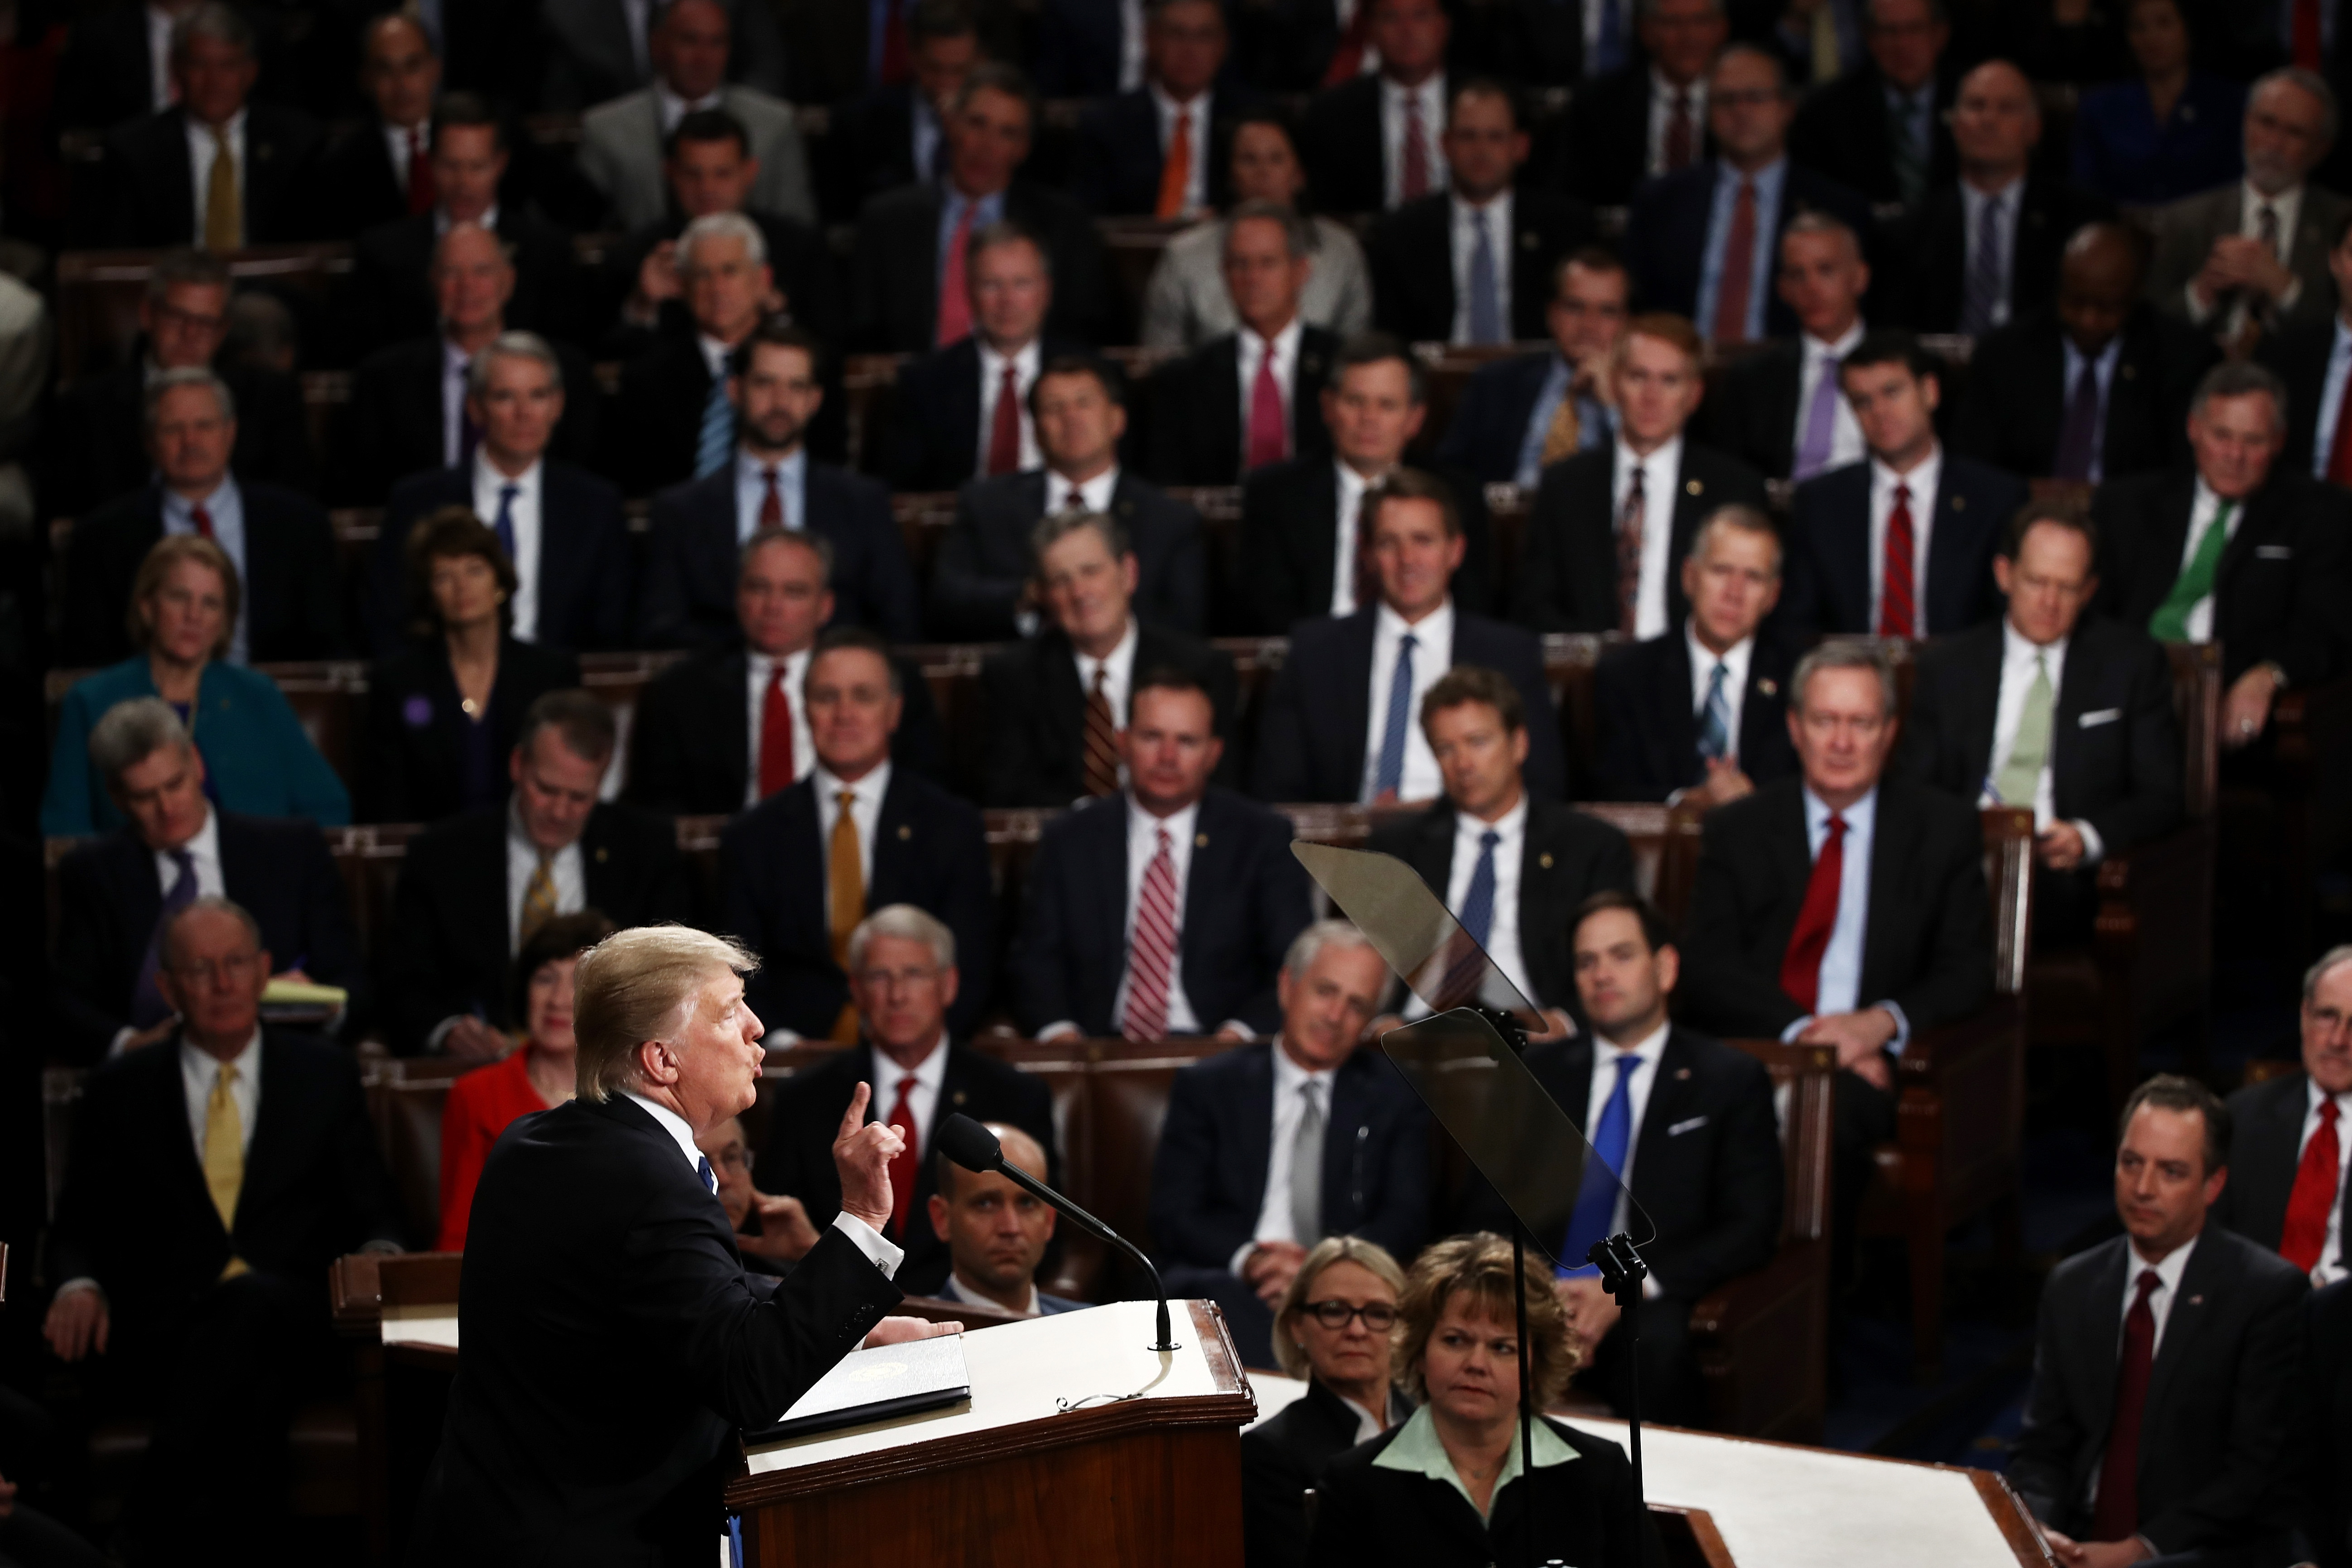 President Trump speaks to the joint session of Congress